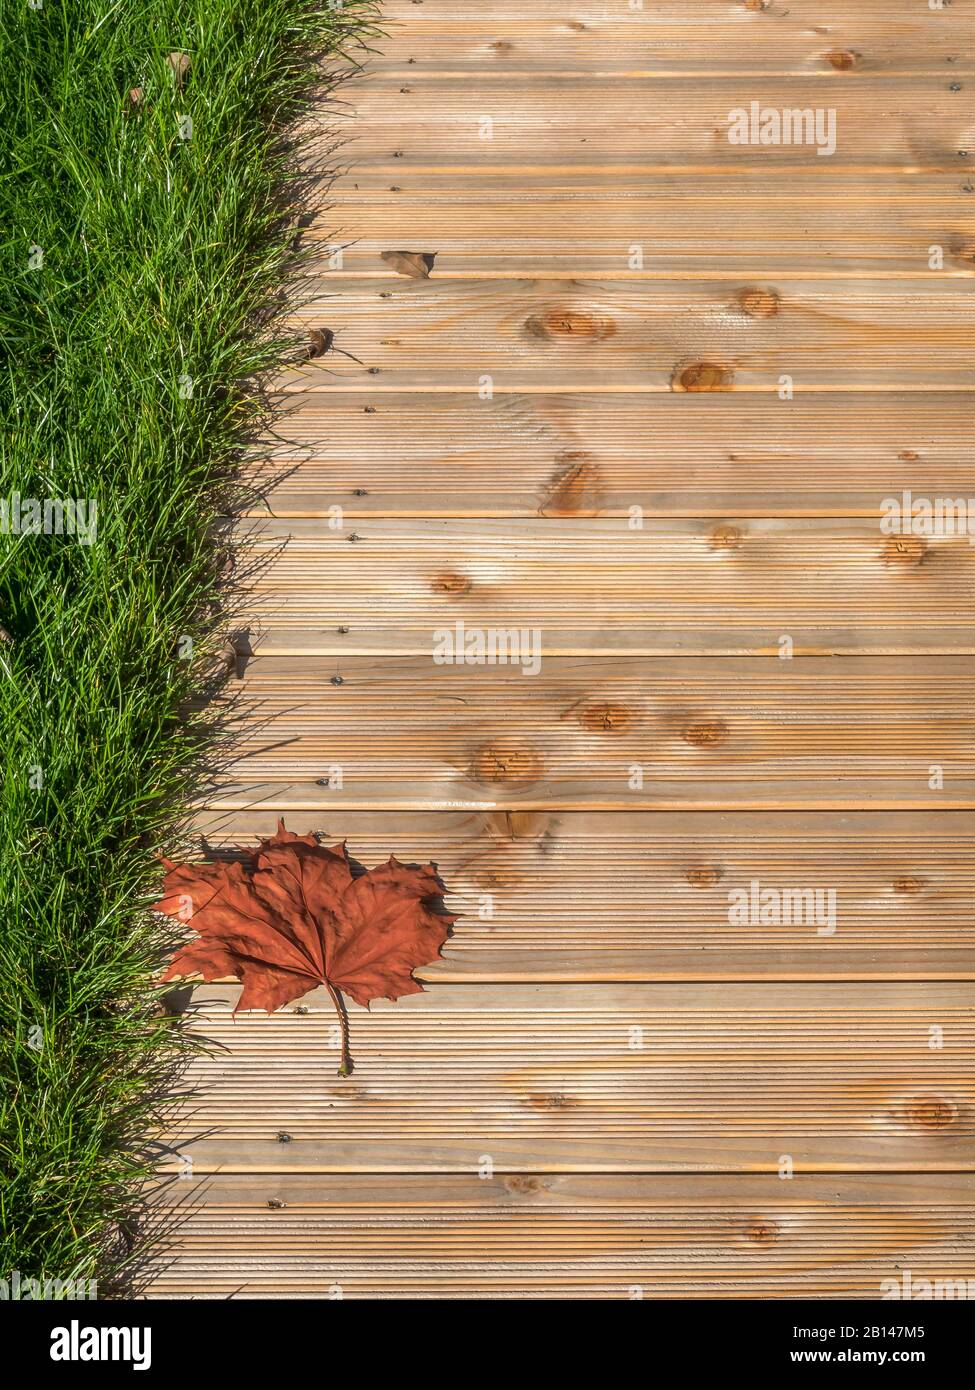 Patio, leaf, maple, wooden floorboards, grass Stock Photo